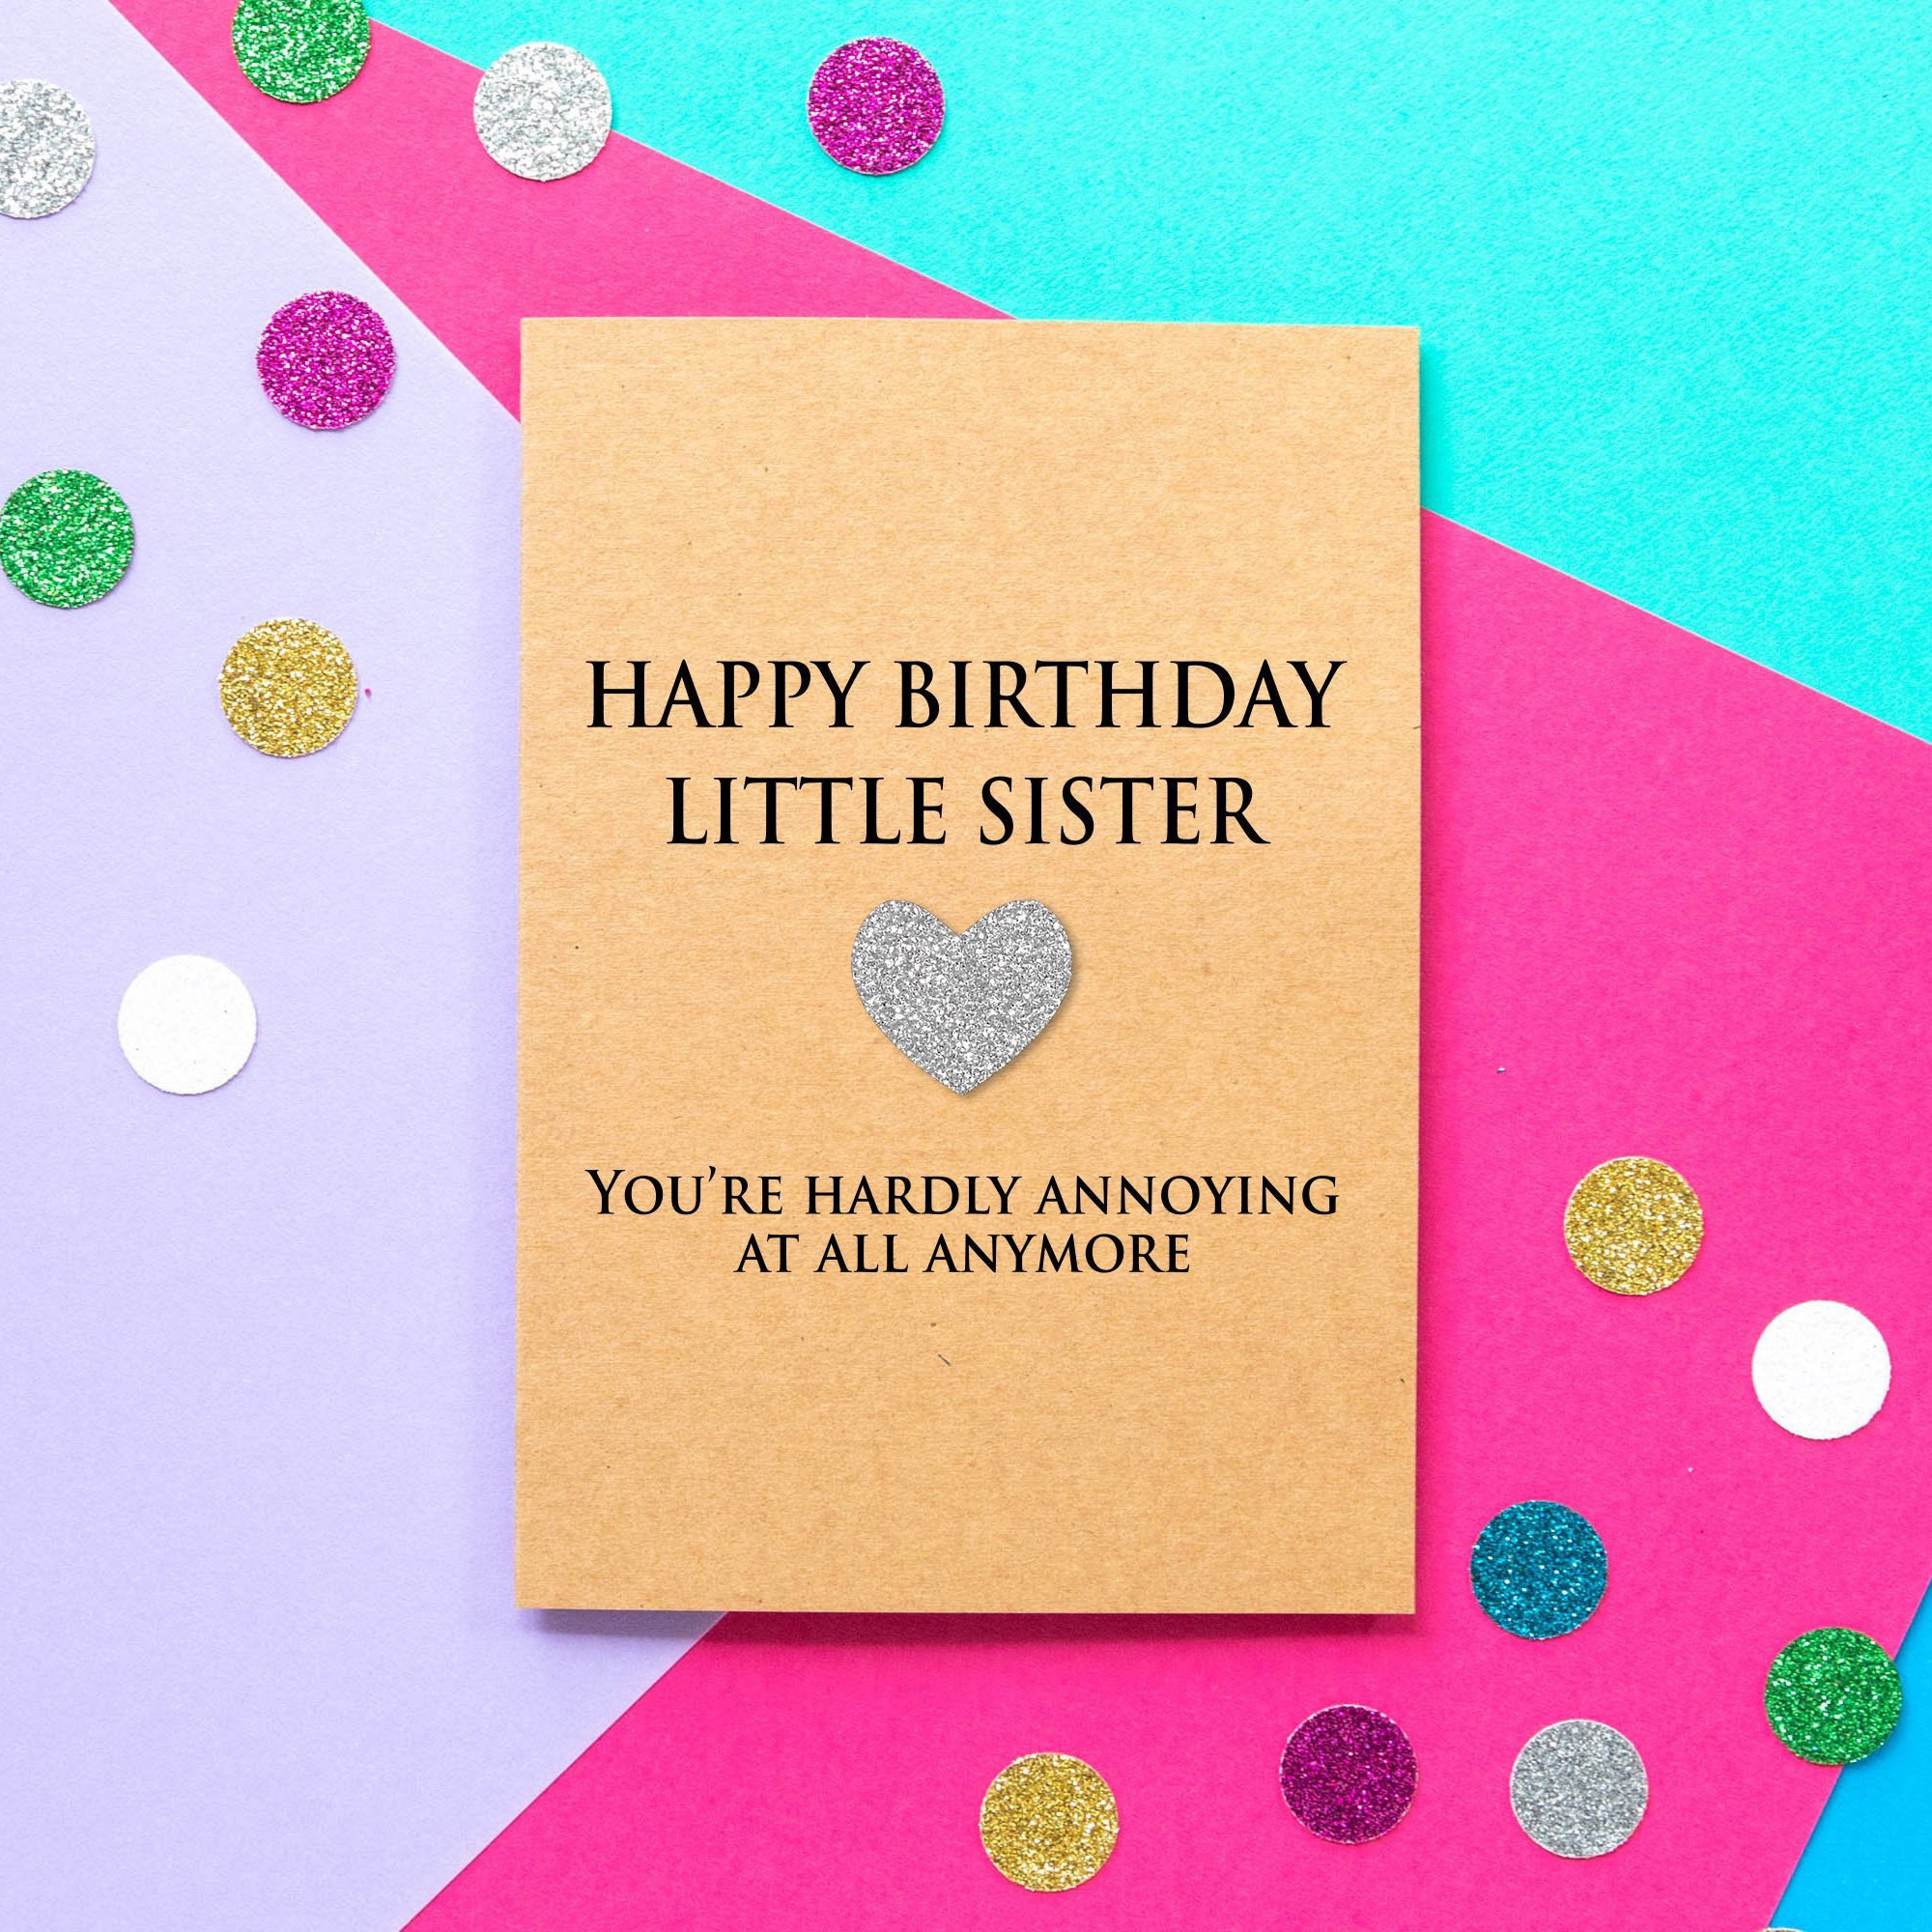 Funny Birthday Cards For Sister
 Funny Little Sister Birthday Card You re Hardly Annoying